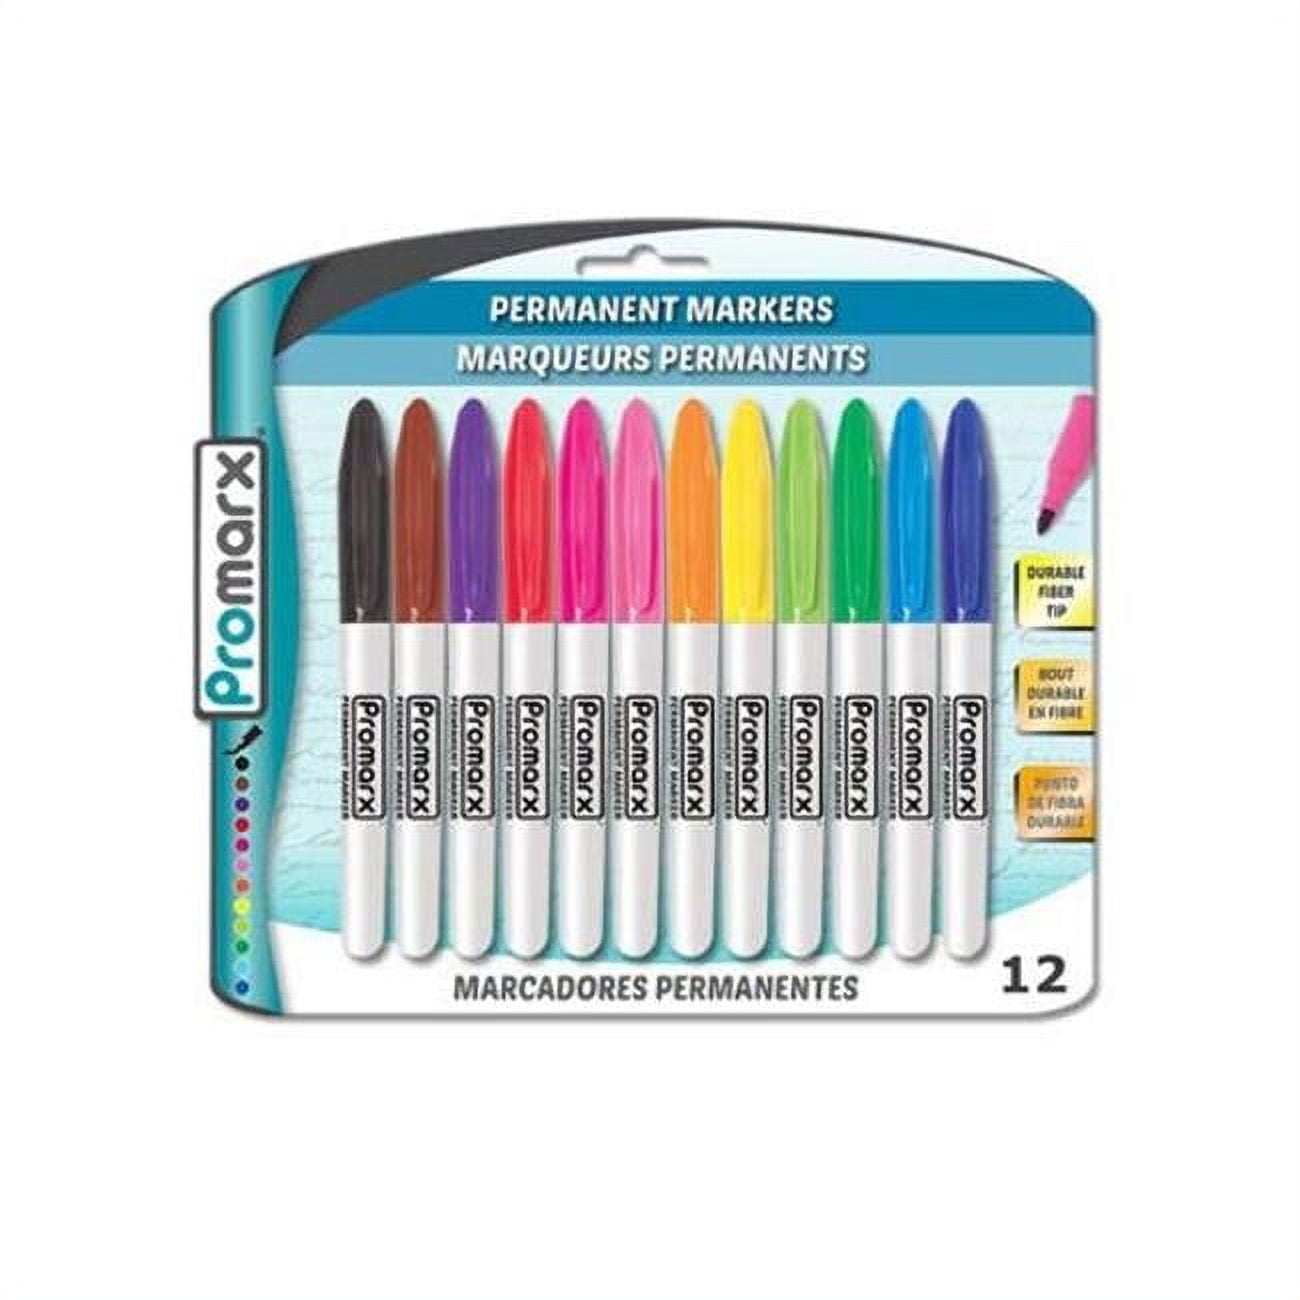 2324535 Permanent Markers Assorted Color - 12 Count - Case Of 24